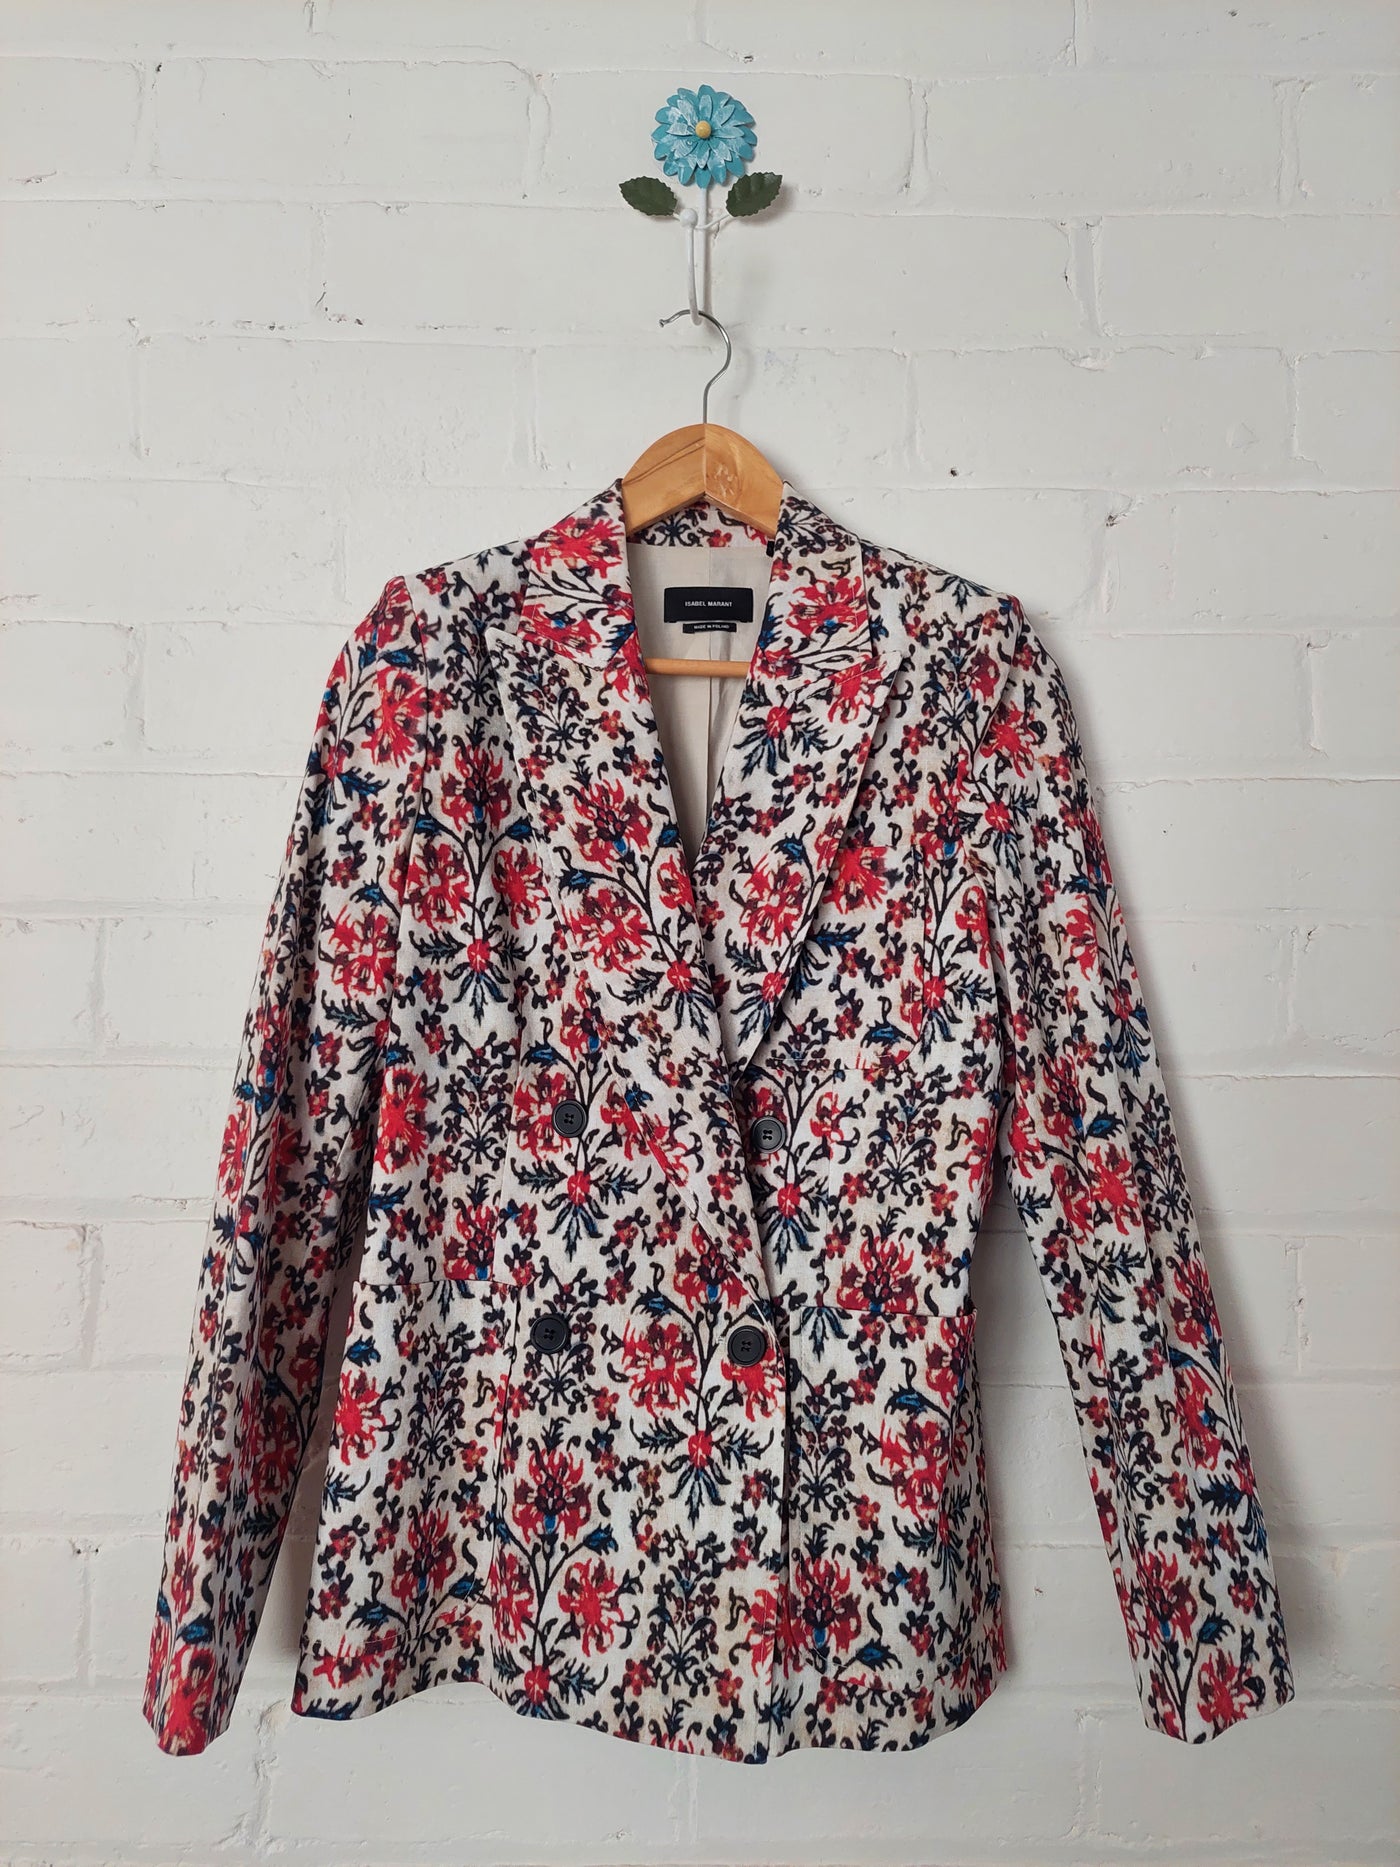 Isabel Marant BNWT Lenalia Floral Print Jacket in Red, Size 36 (8)